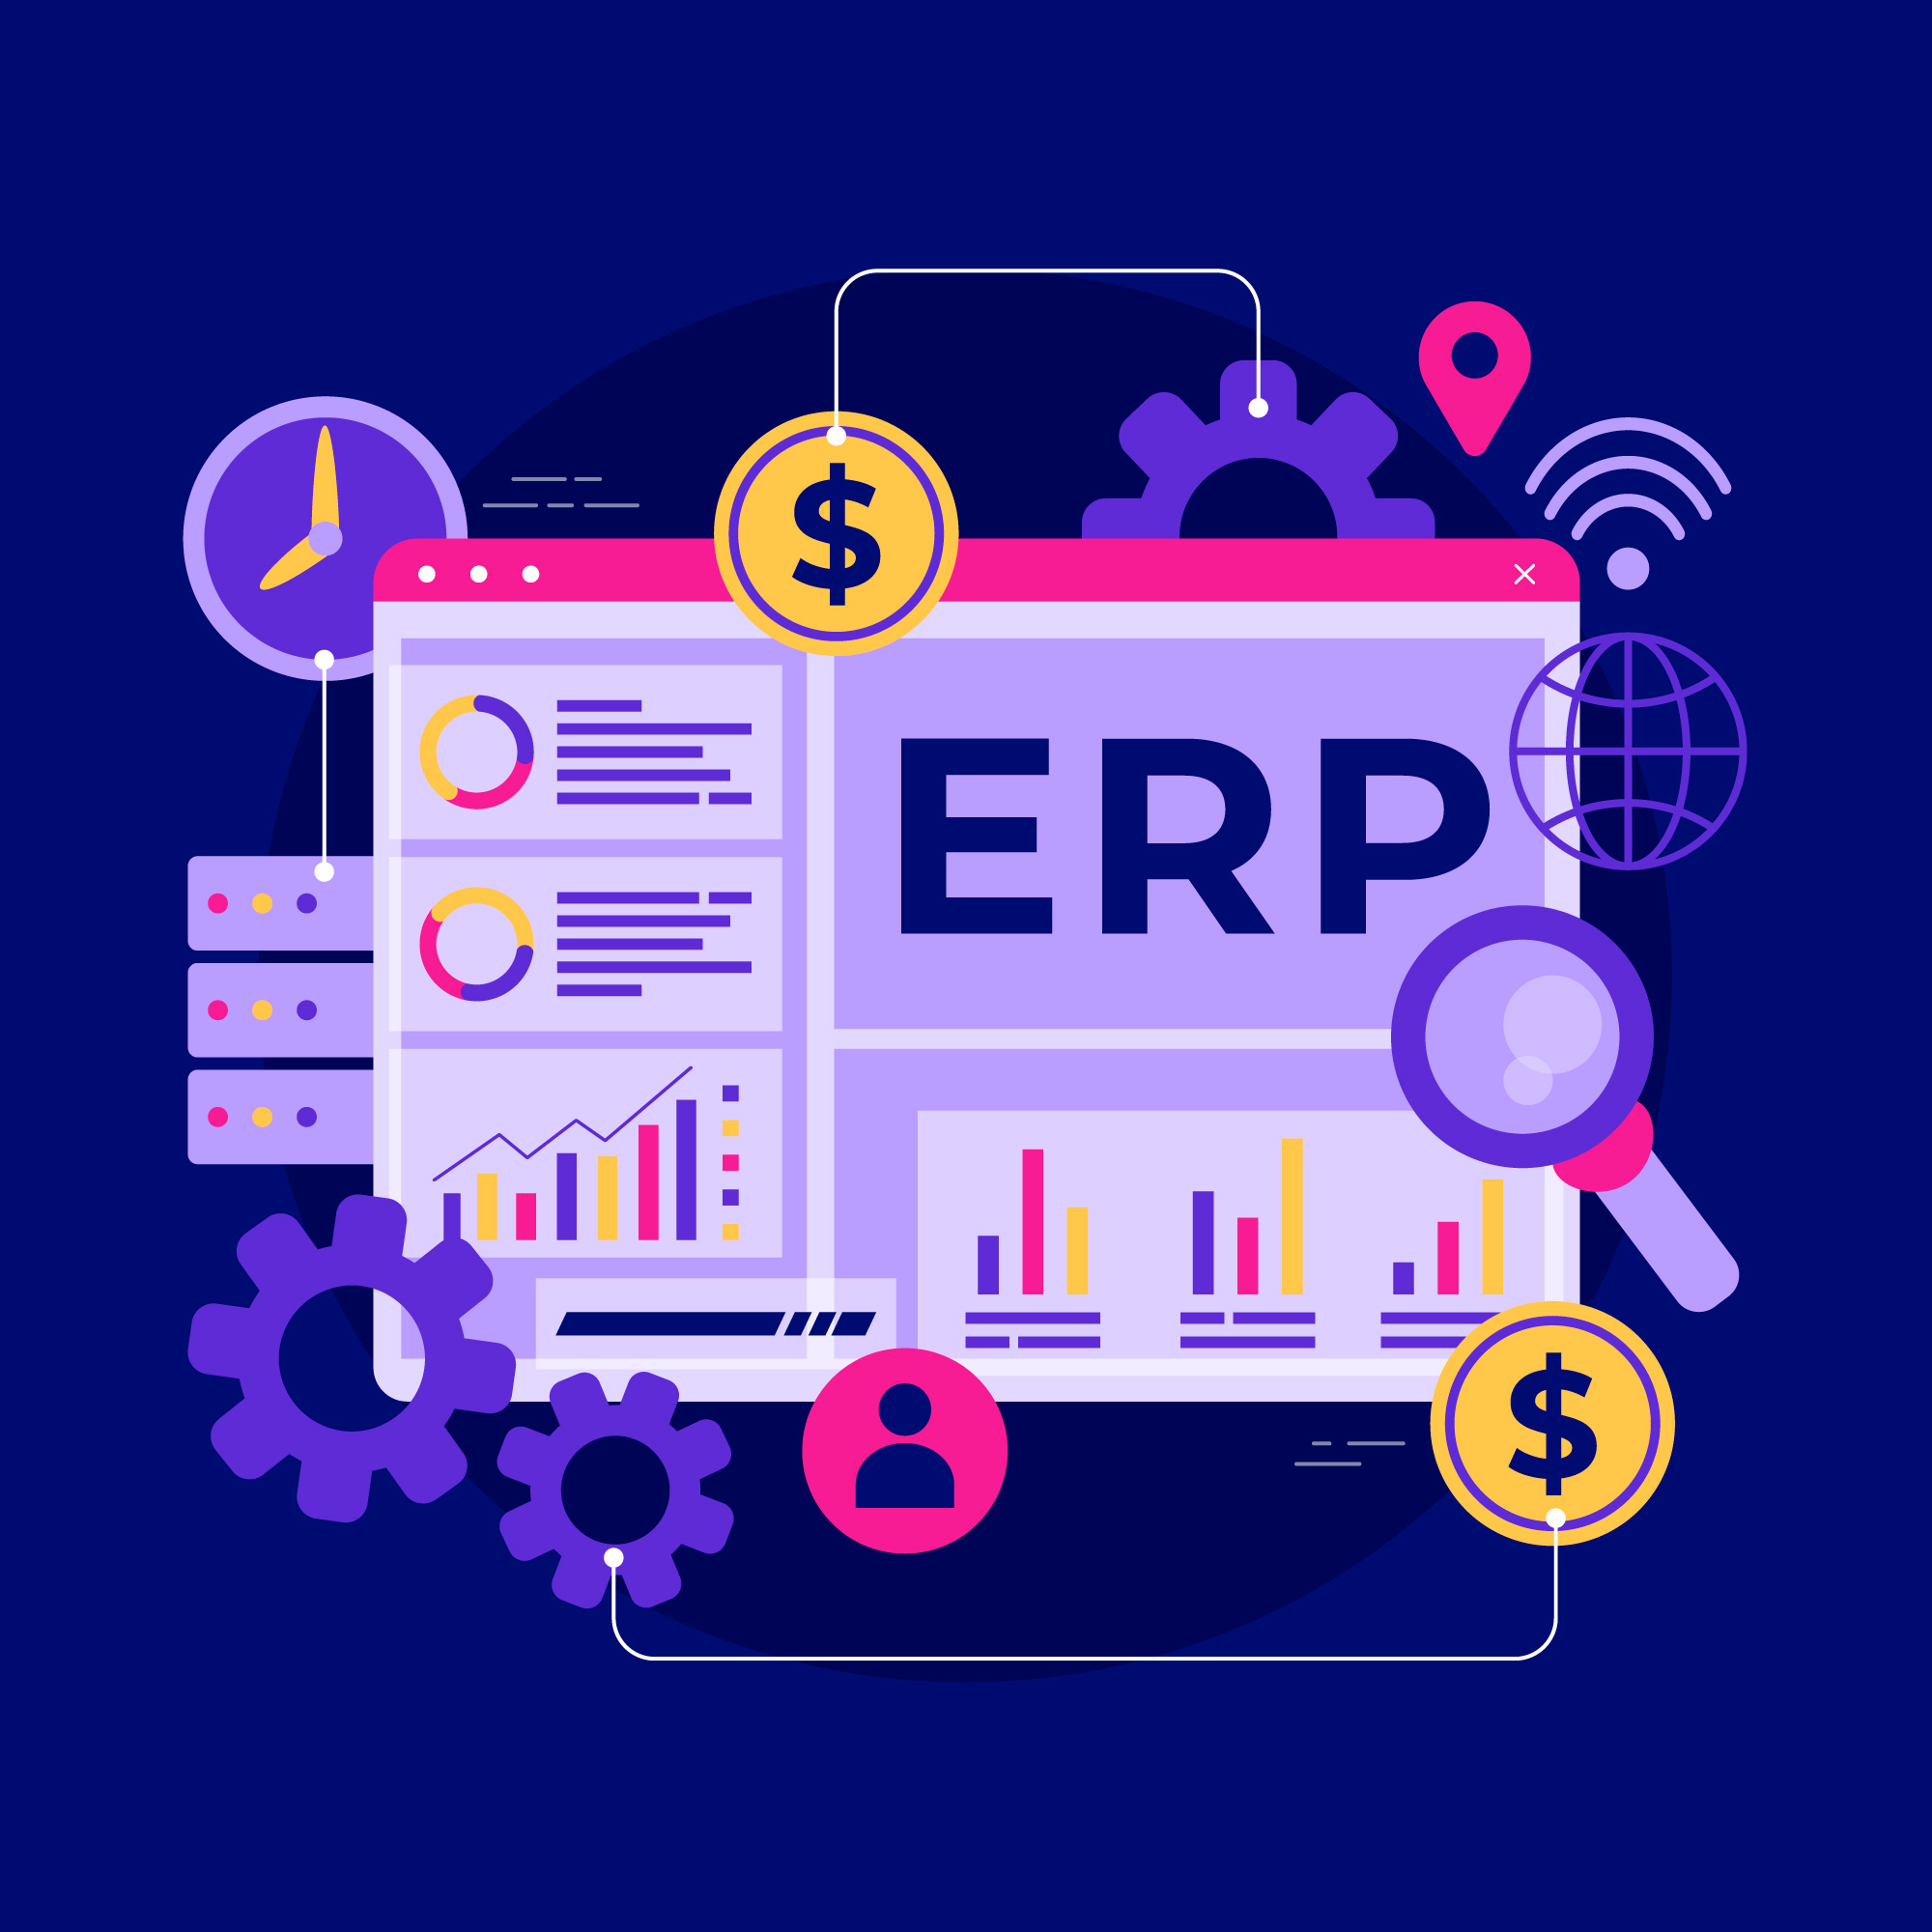 Excel Sheets vs. ERP: what works better?